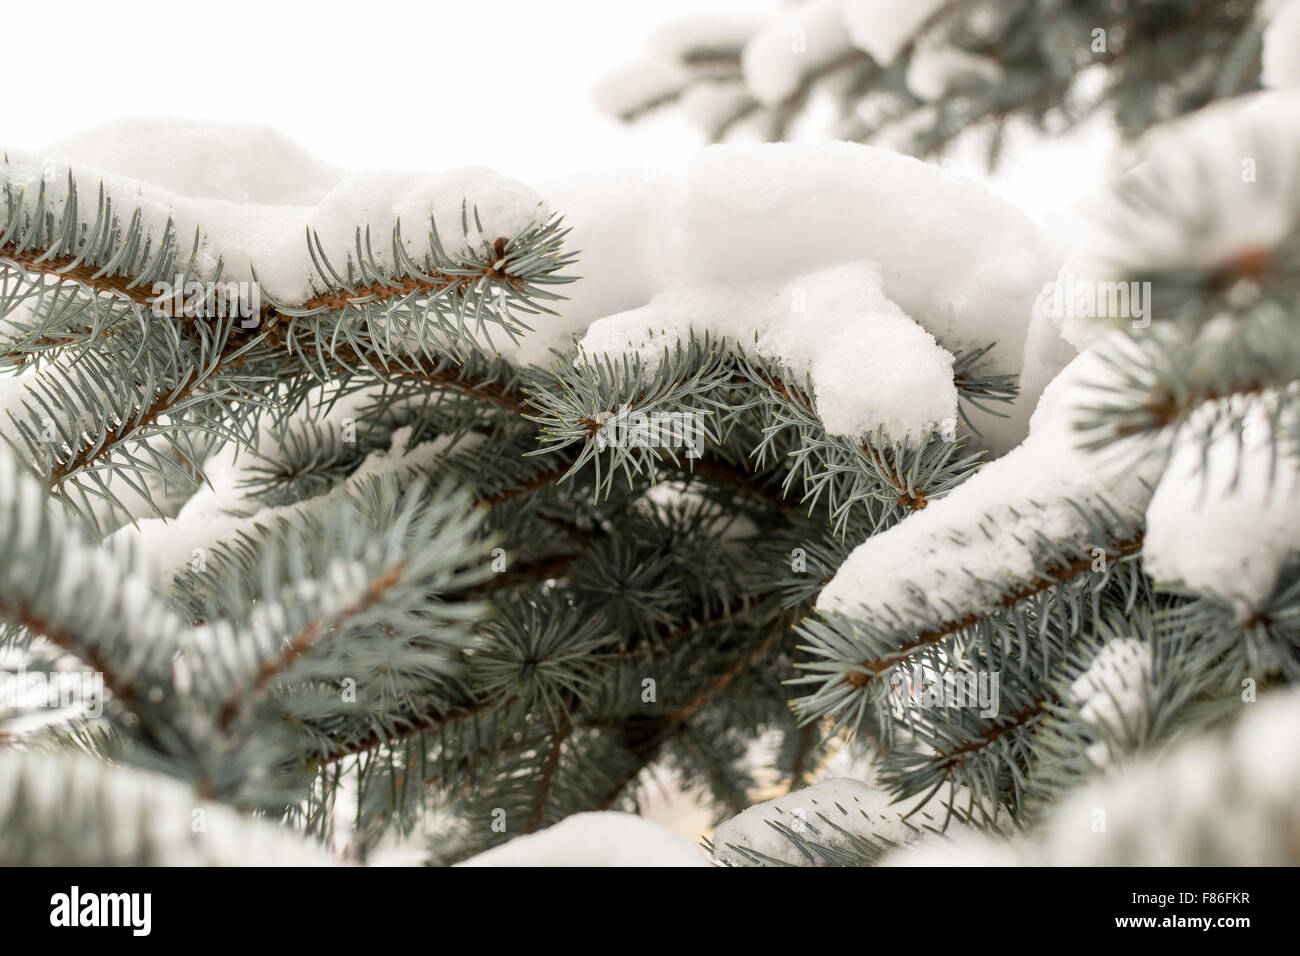 Fresh winter snow covers the pine needles and branches of a green pine or fir tree in the winter season Stock Photo